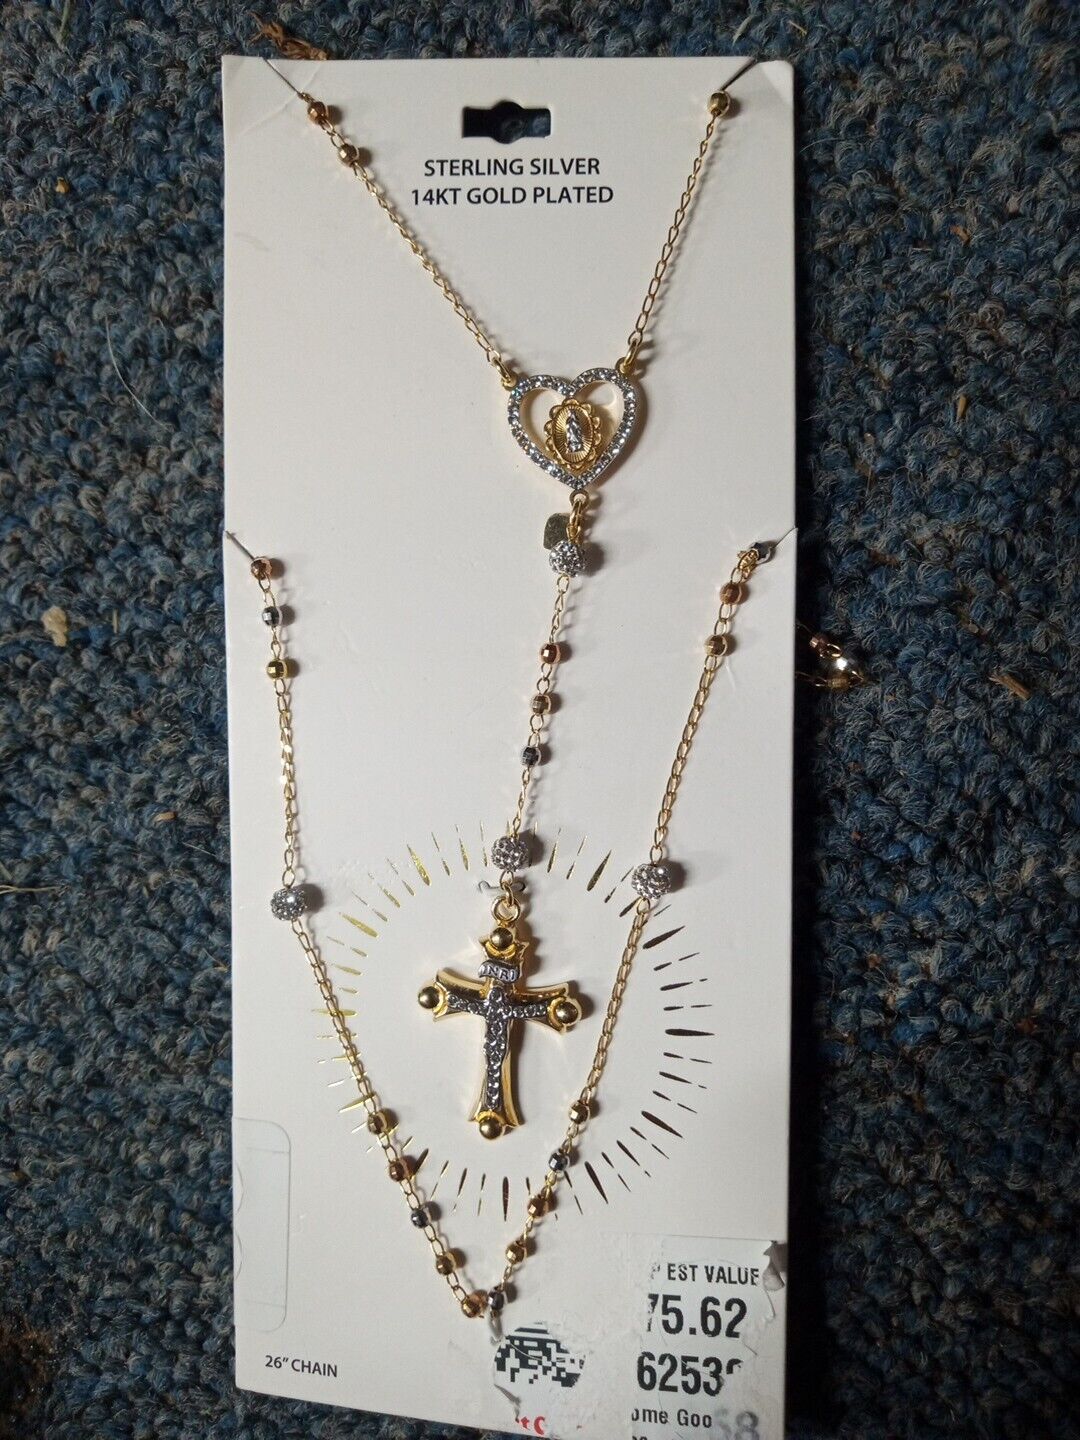 Sterling Silver 14kt Gold Plated Rosary